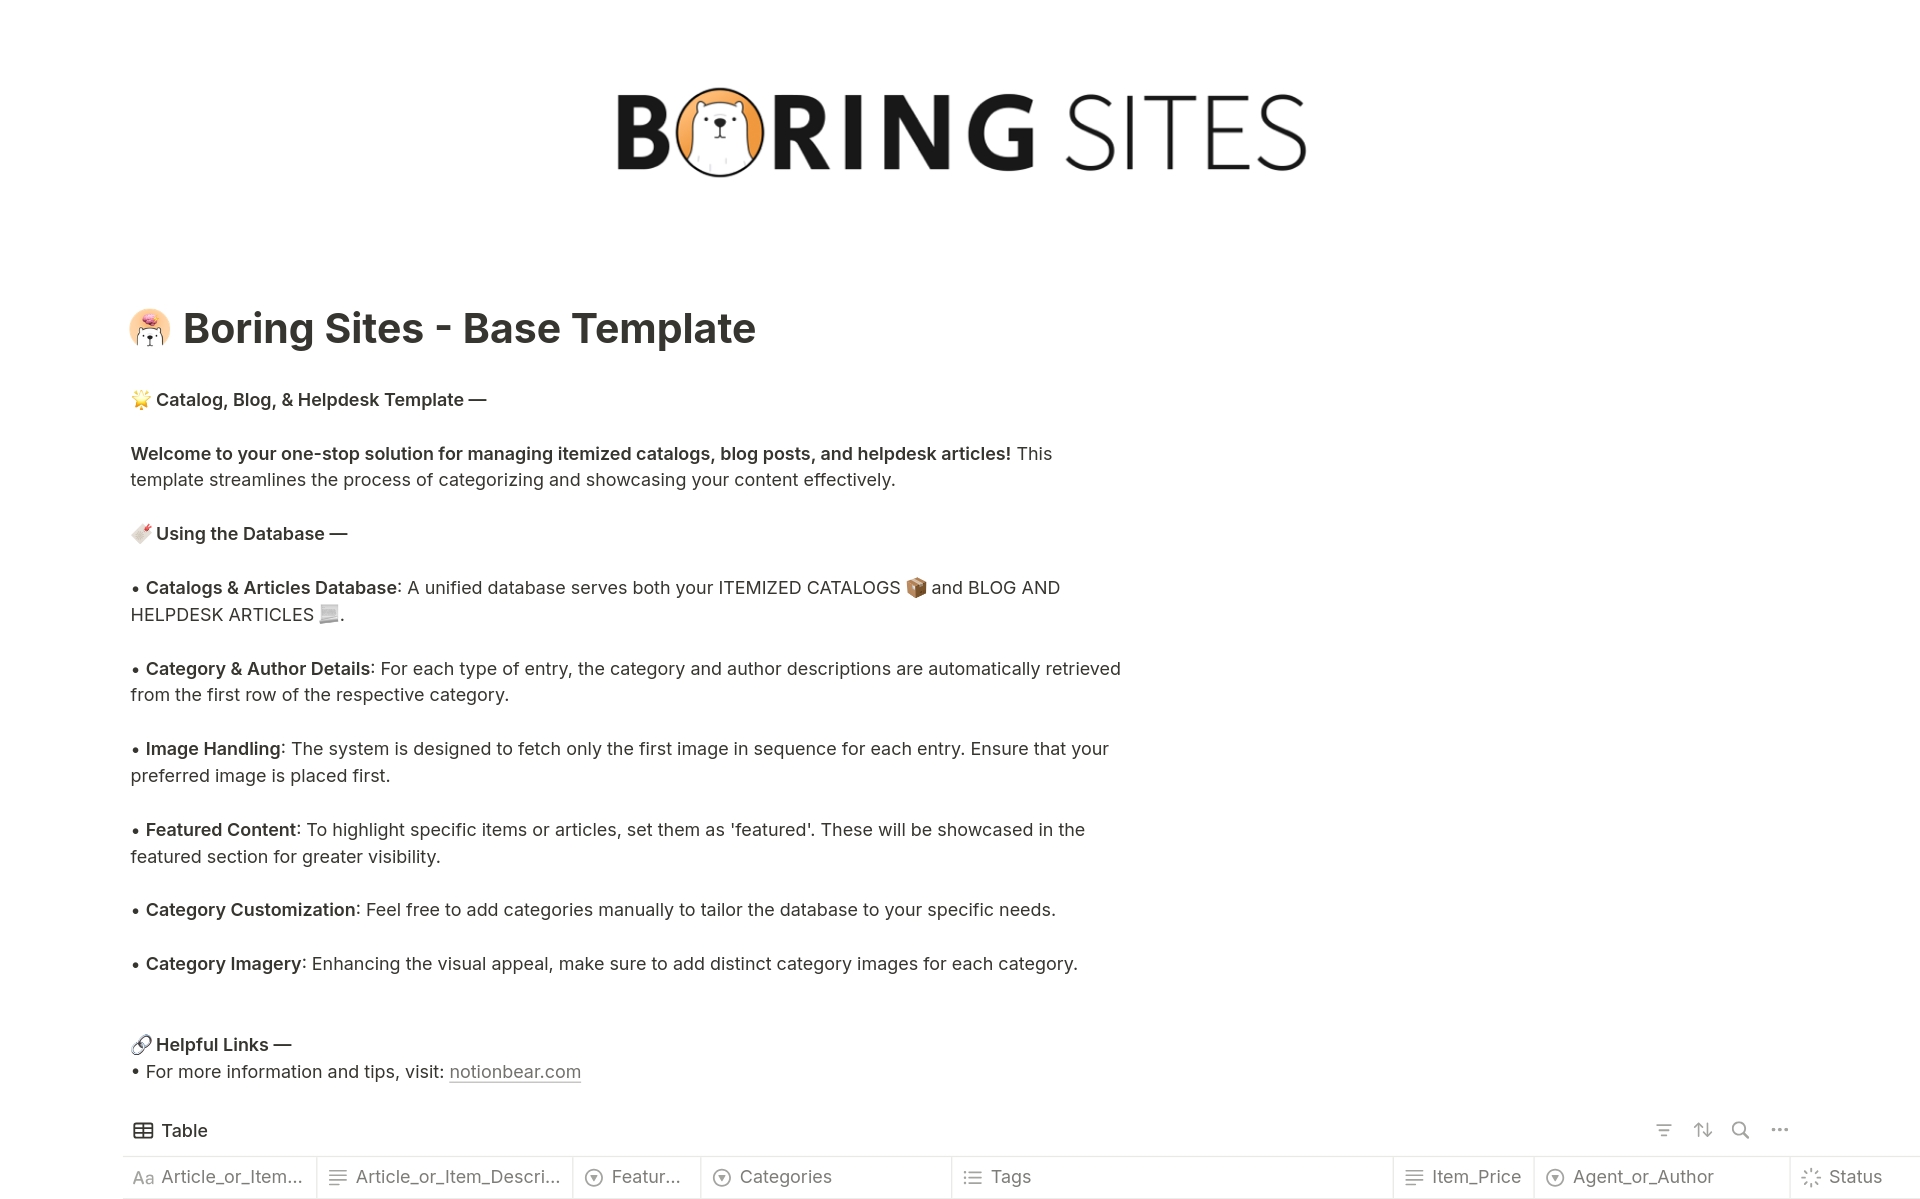 Duplicate this template , and head on over to boring sites to create a set and forget site. 
the site stays alive and you do what you do best, write on notion. Build your business!  